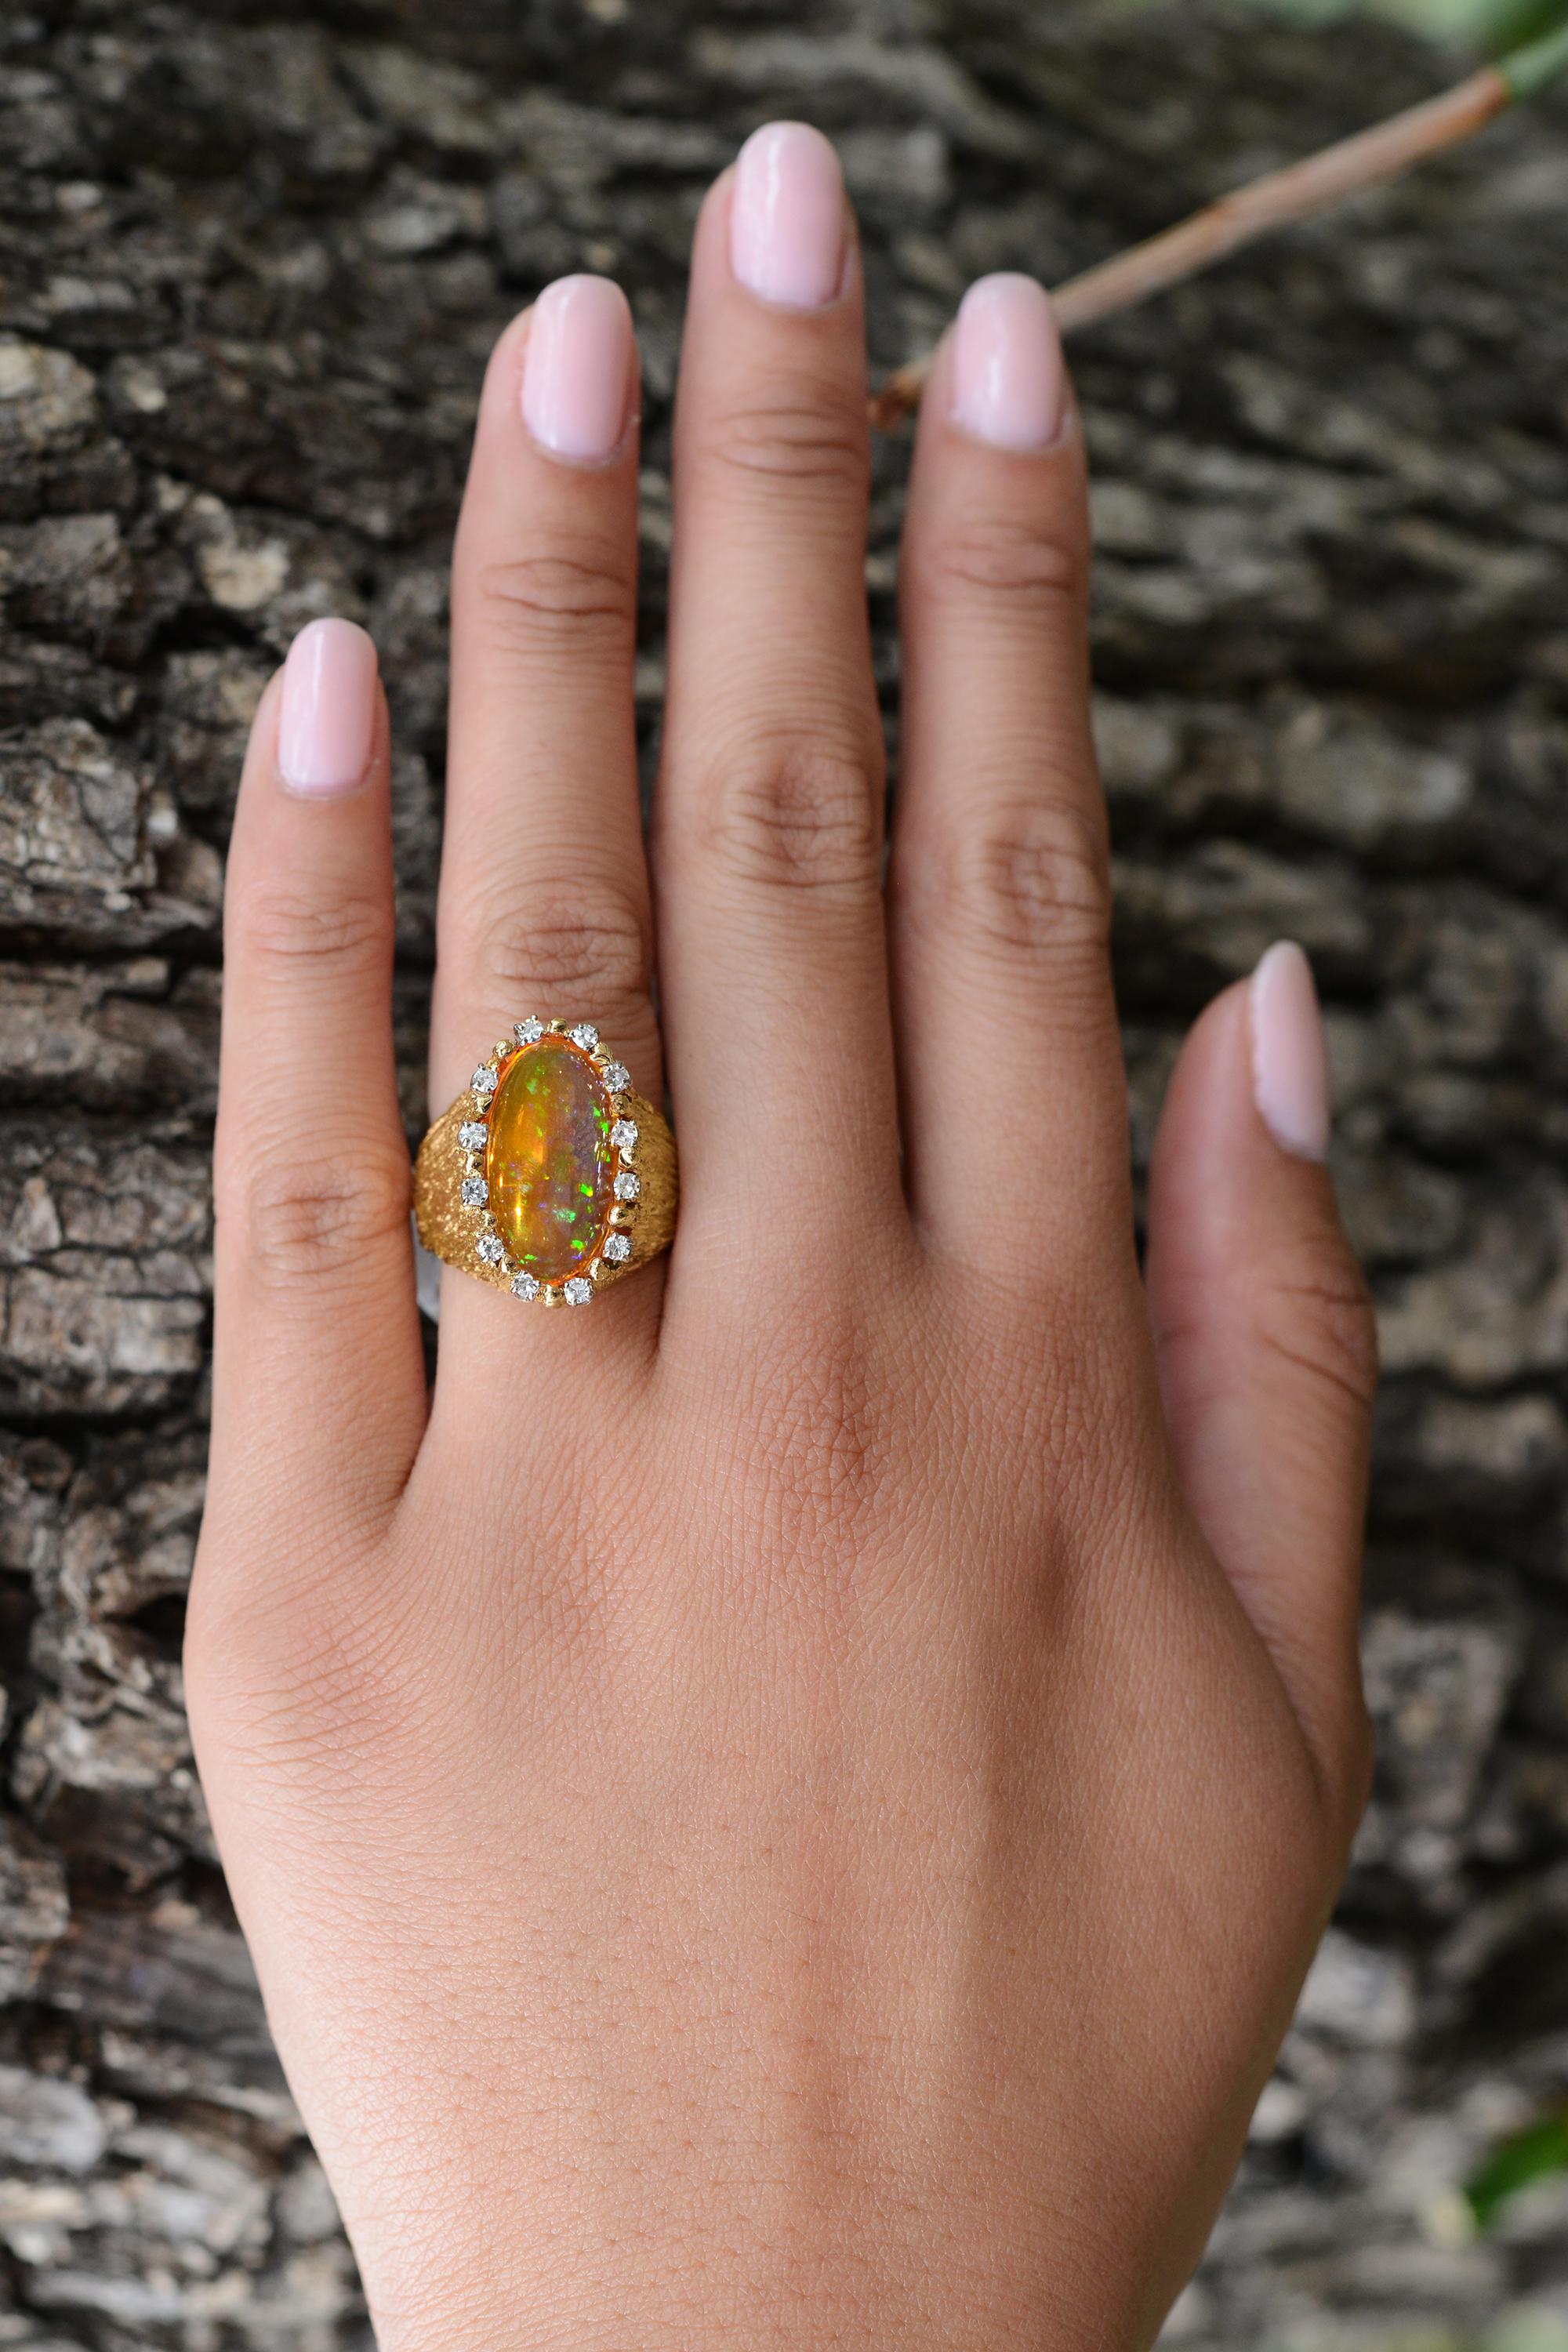 This vintage ring is from the private estate collection of iconic actor Robert Mitchum, dating back to the 1960s. Made with 18 karat yellow gold, the cocktail ring features an impressive 5.29 carat Mexican fire opal. A halo of sparkling round